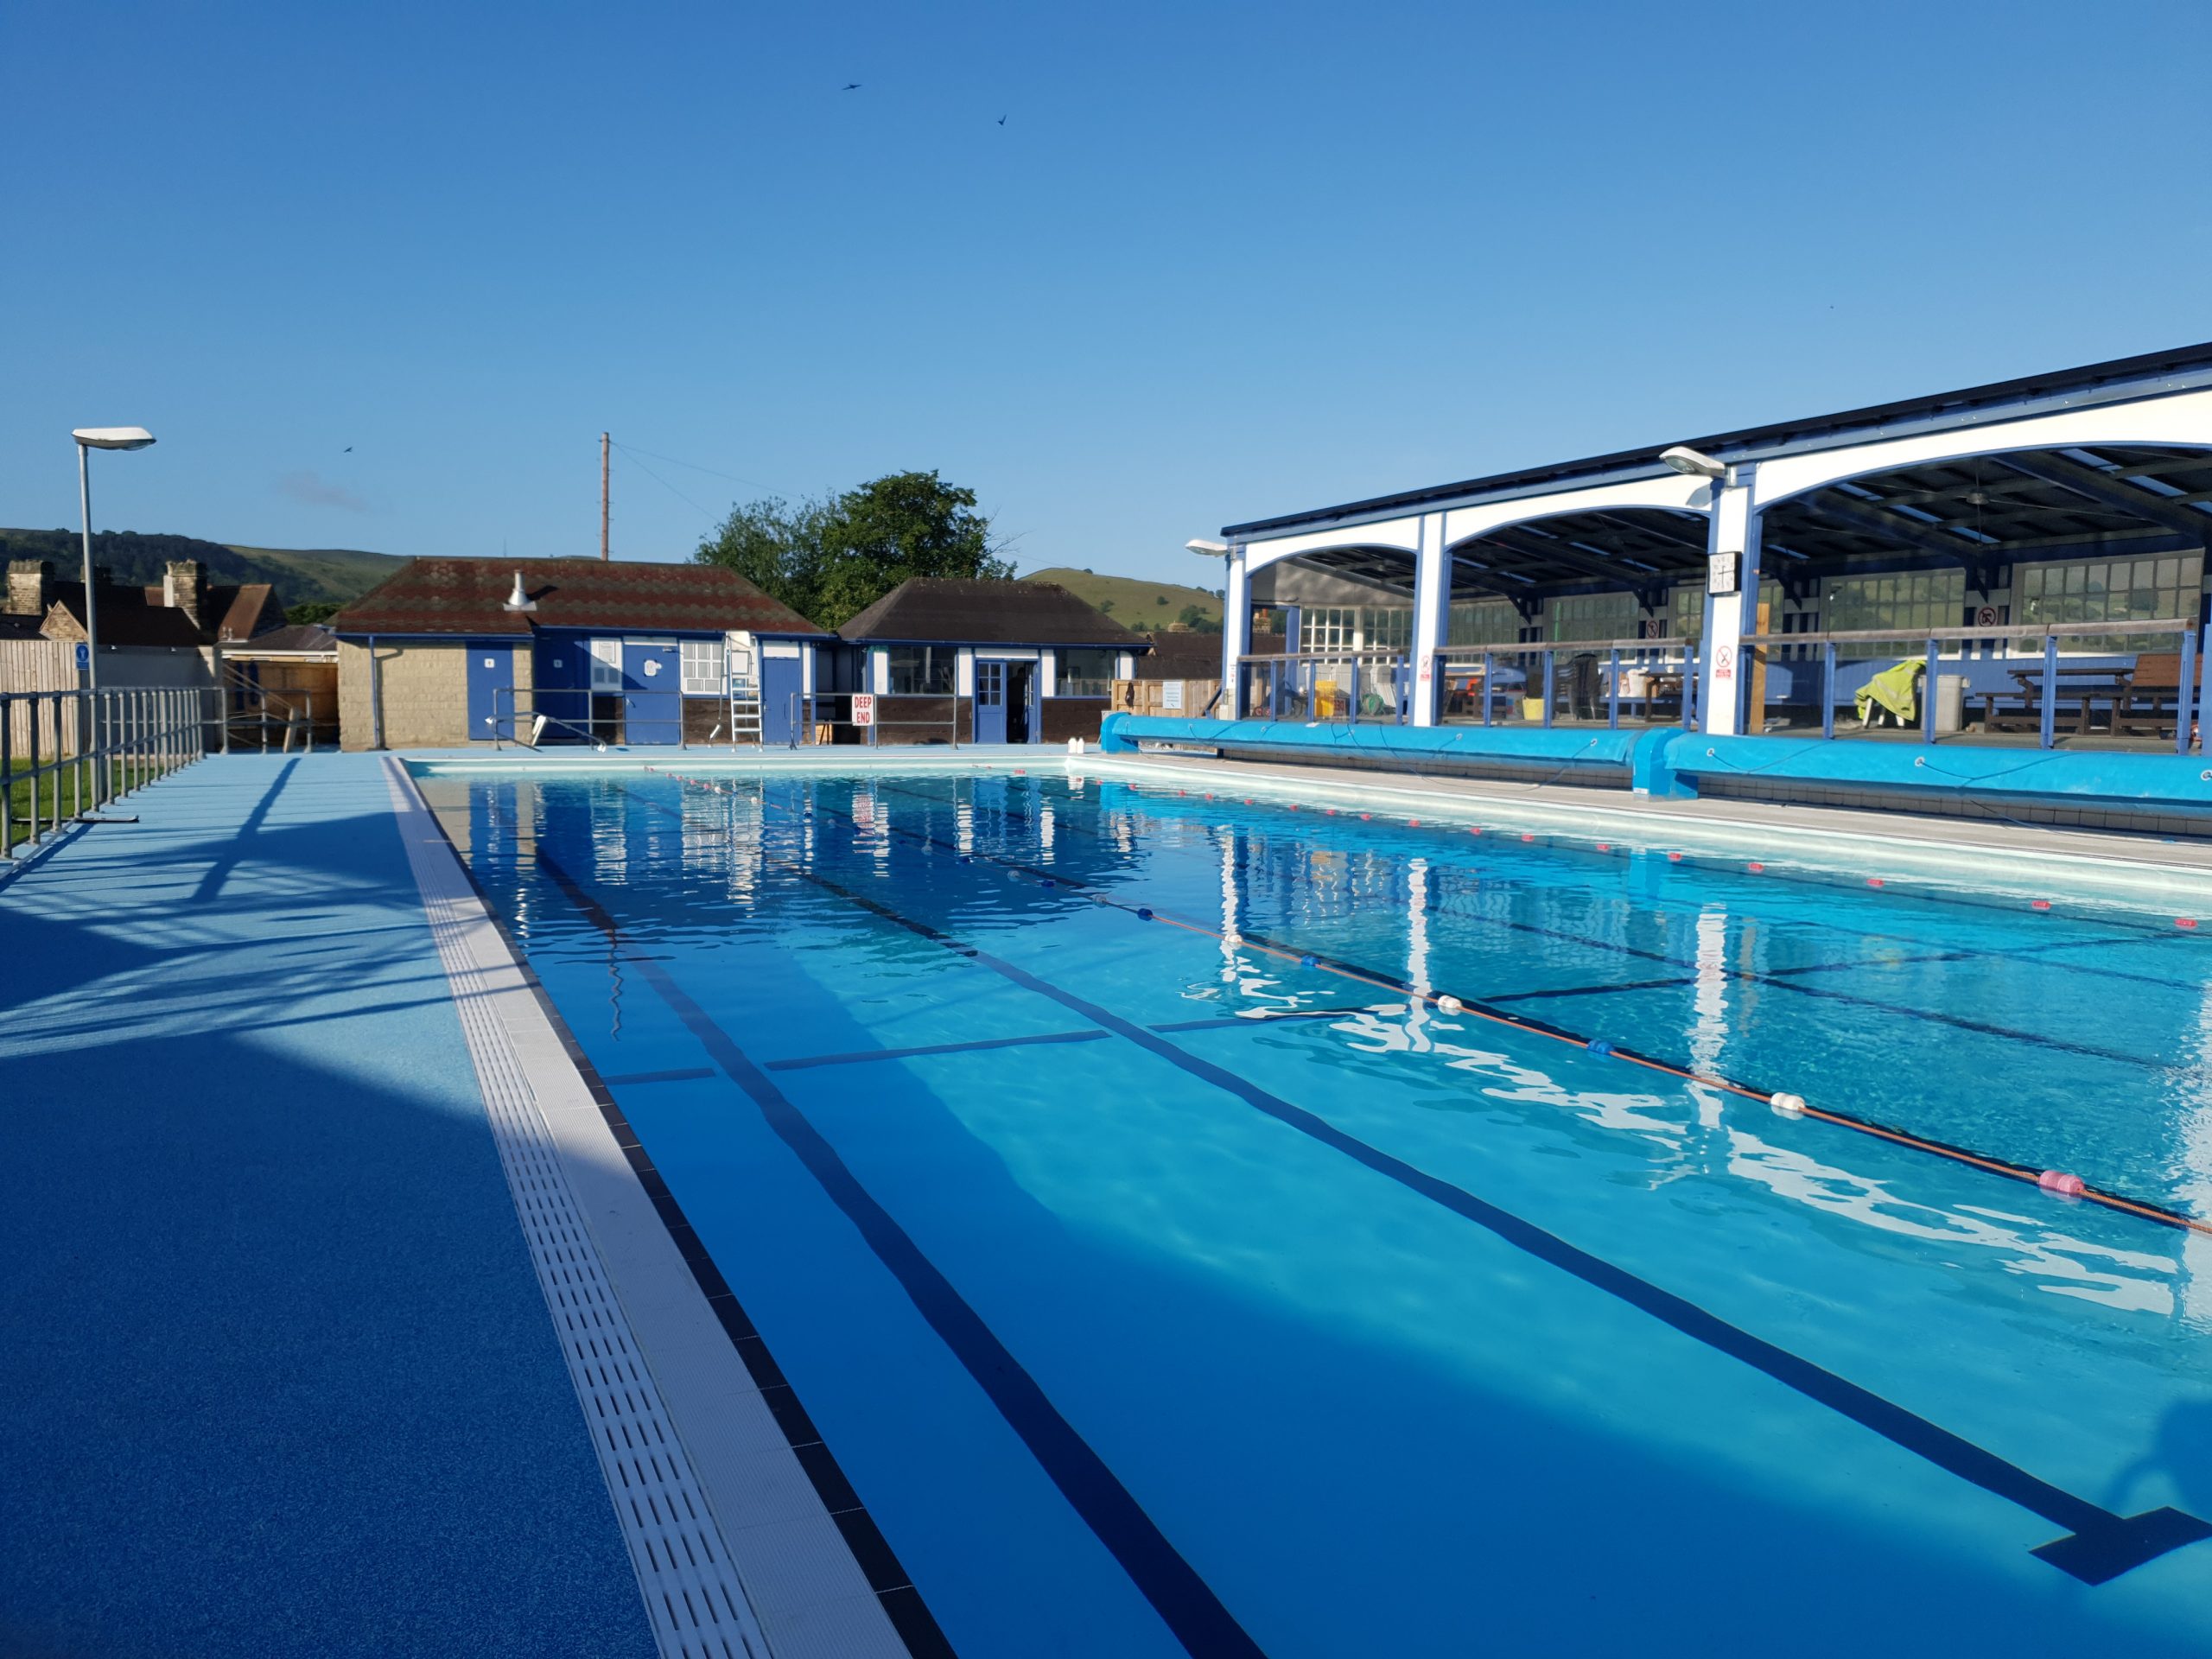 Hathersage Outdoor Swimming Pool in conjunction with Tom Crooks Architecture